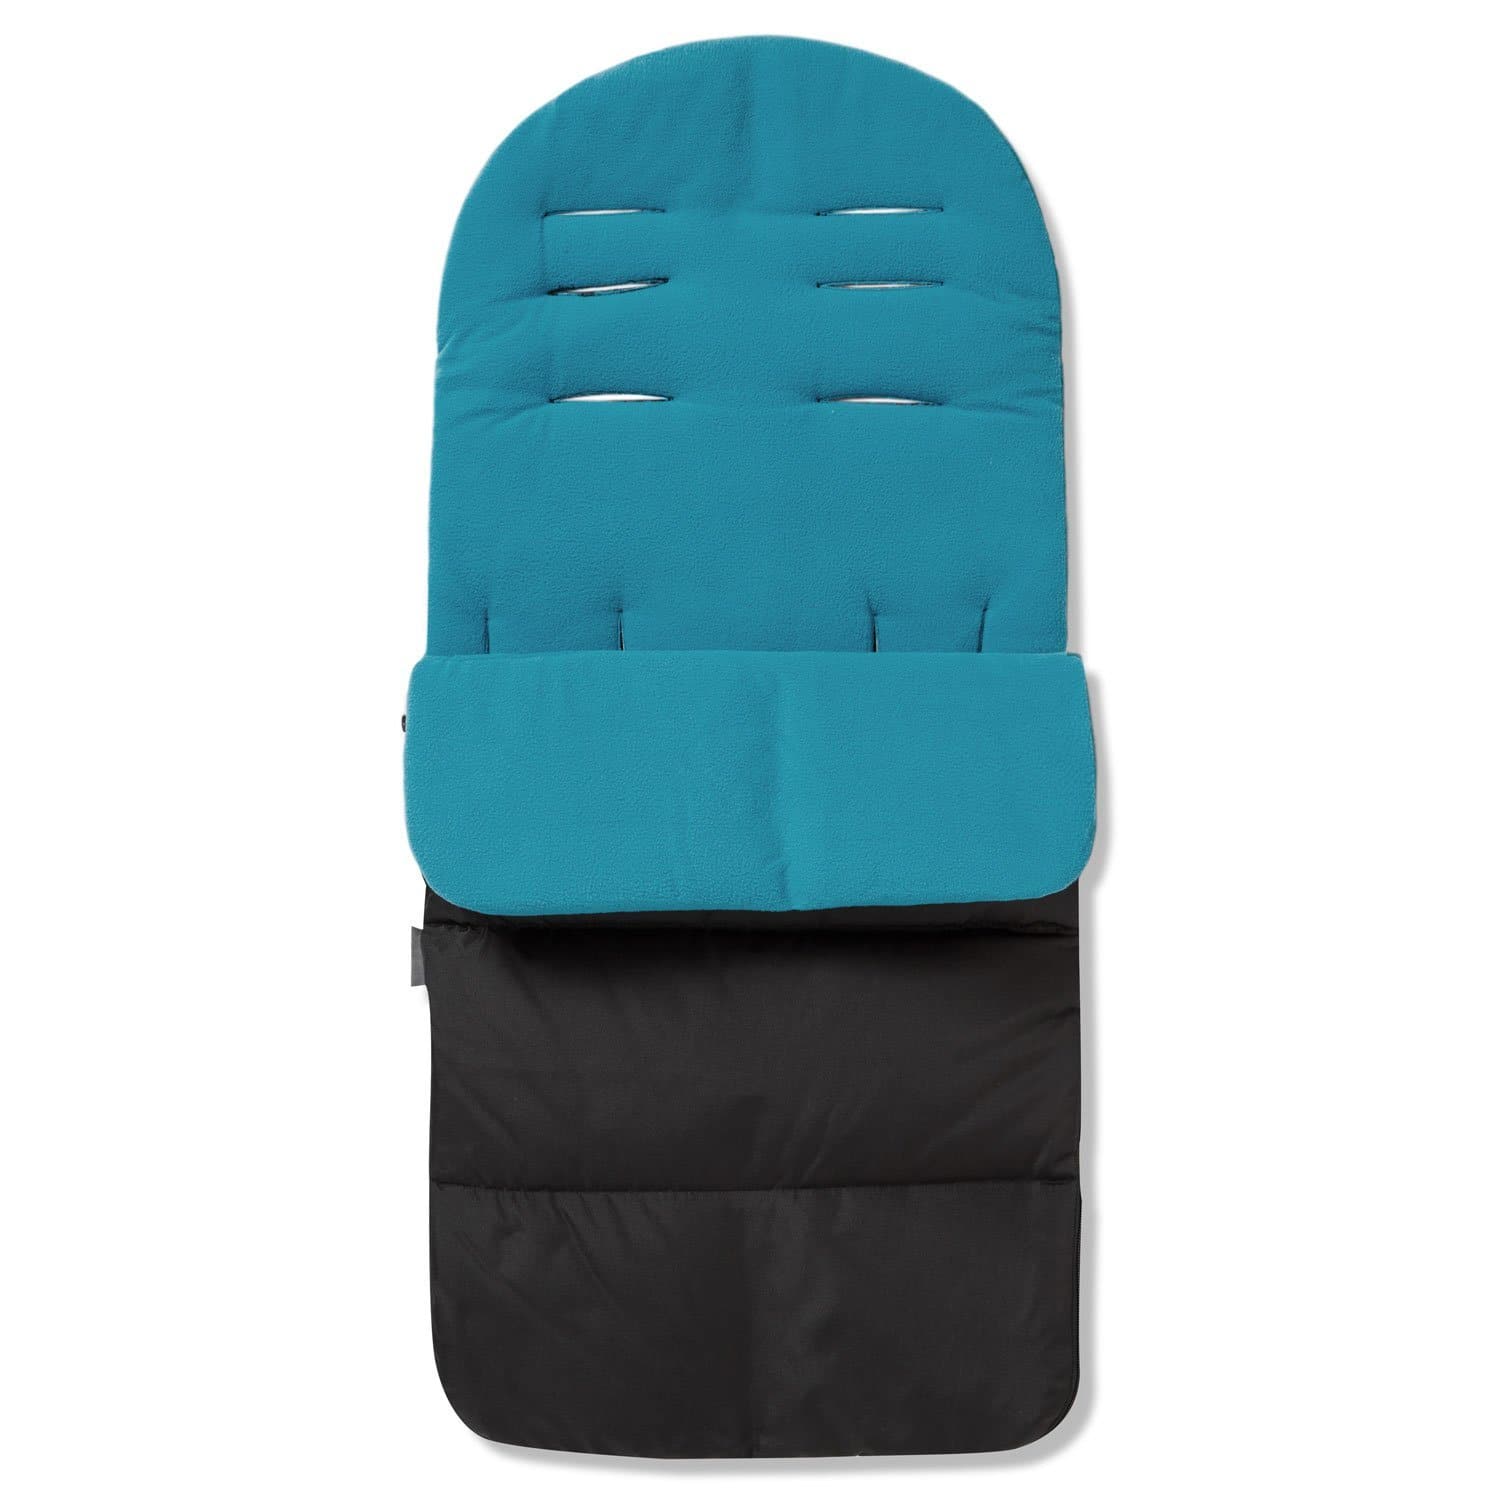 Premium Footmuff / Cosy Toes Compatible with Cosatto - Ocean Blue / Fits All Models | For Your Little One